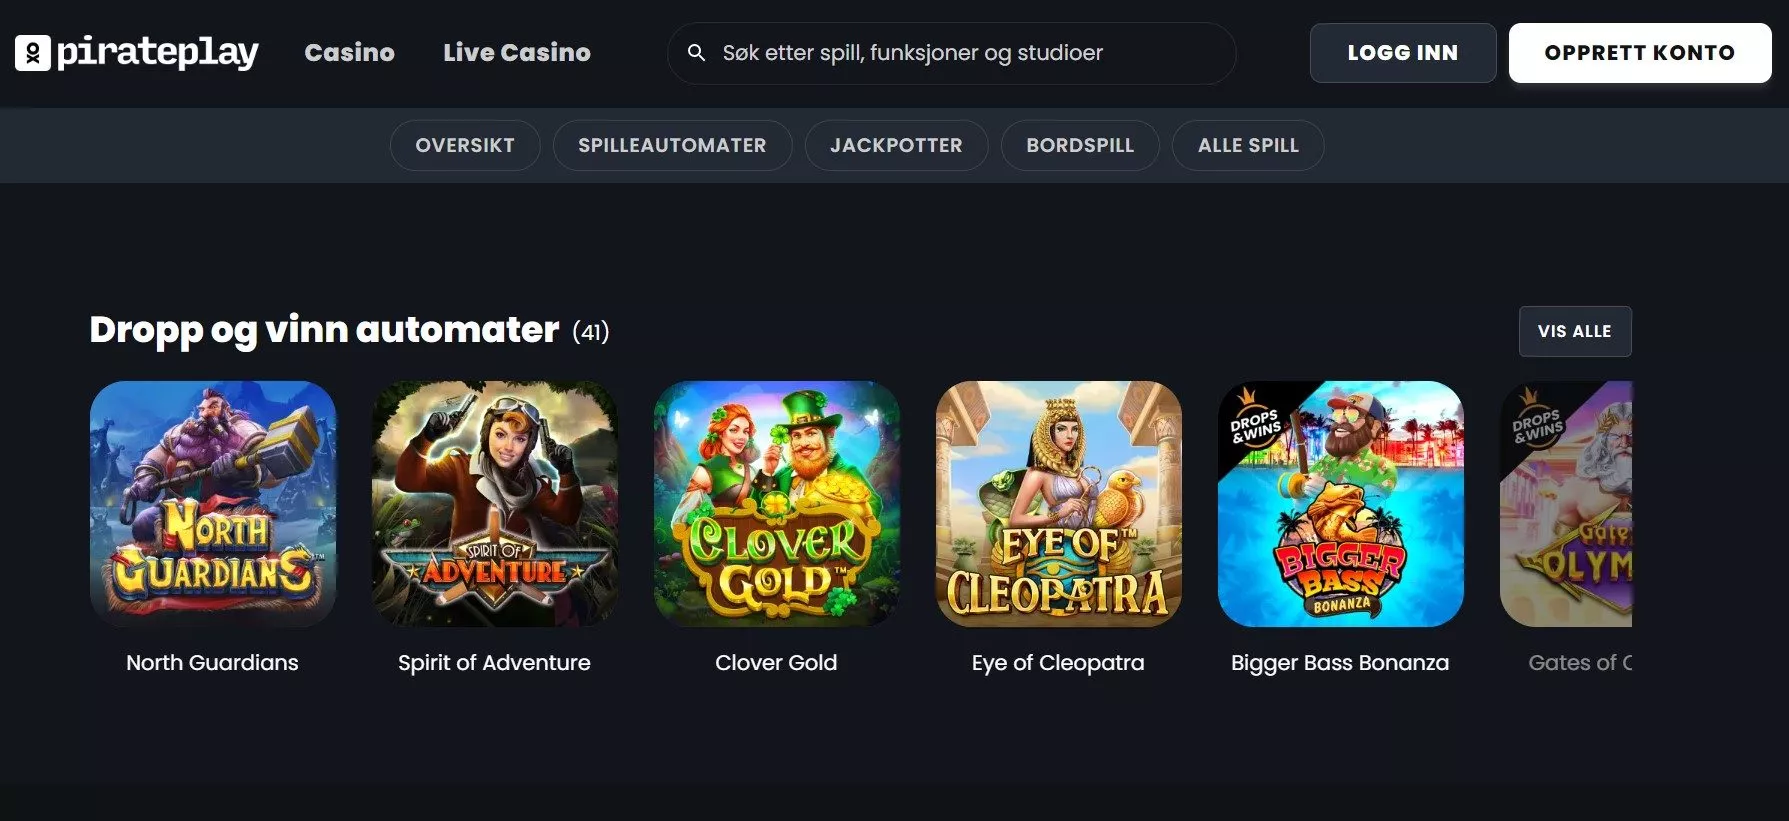 pirate play casino norge 4